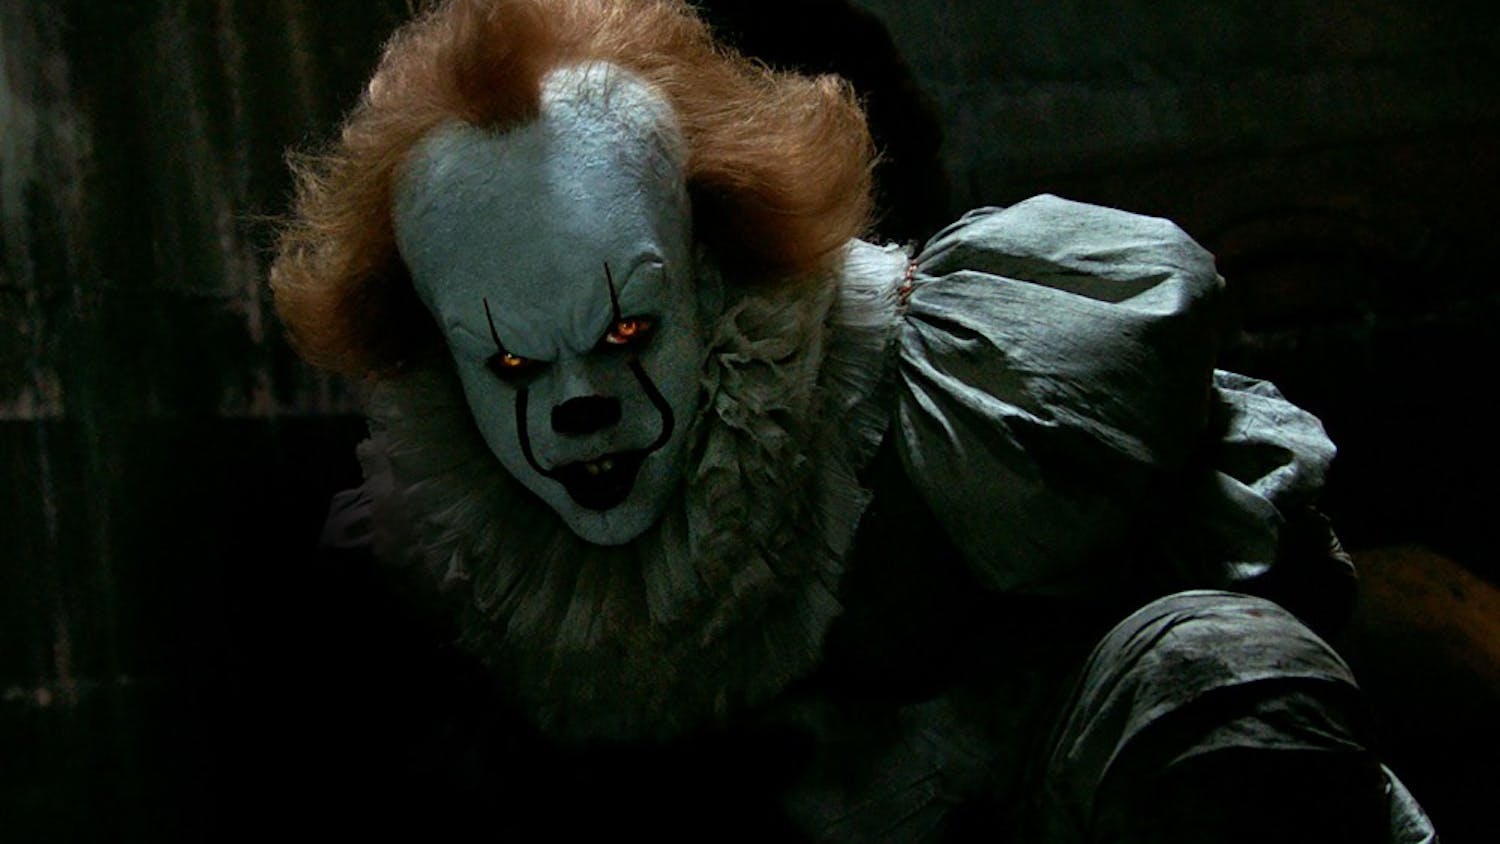 "IT," a supernatural horror film, was released on Sept. 8. Bill Skarsgård stars as Pennywise the Dancing Clown.&nbsp;